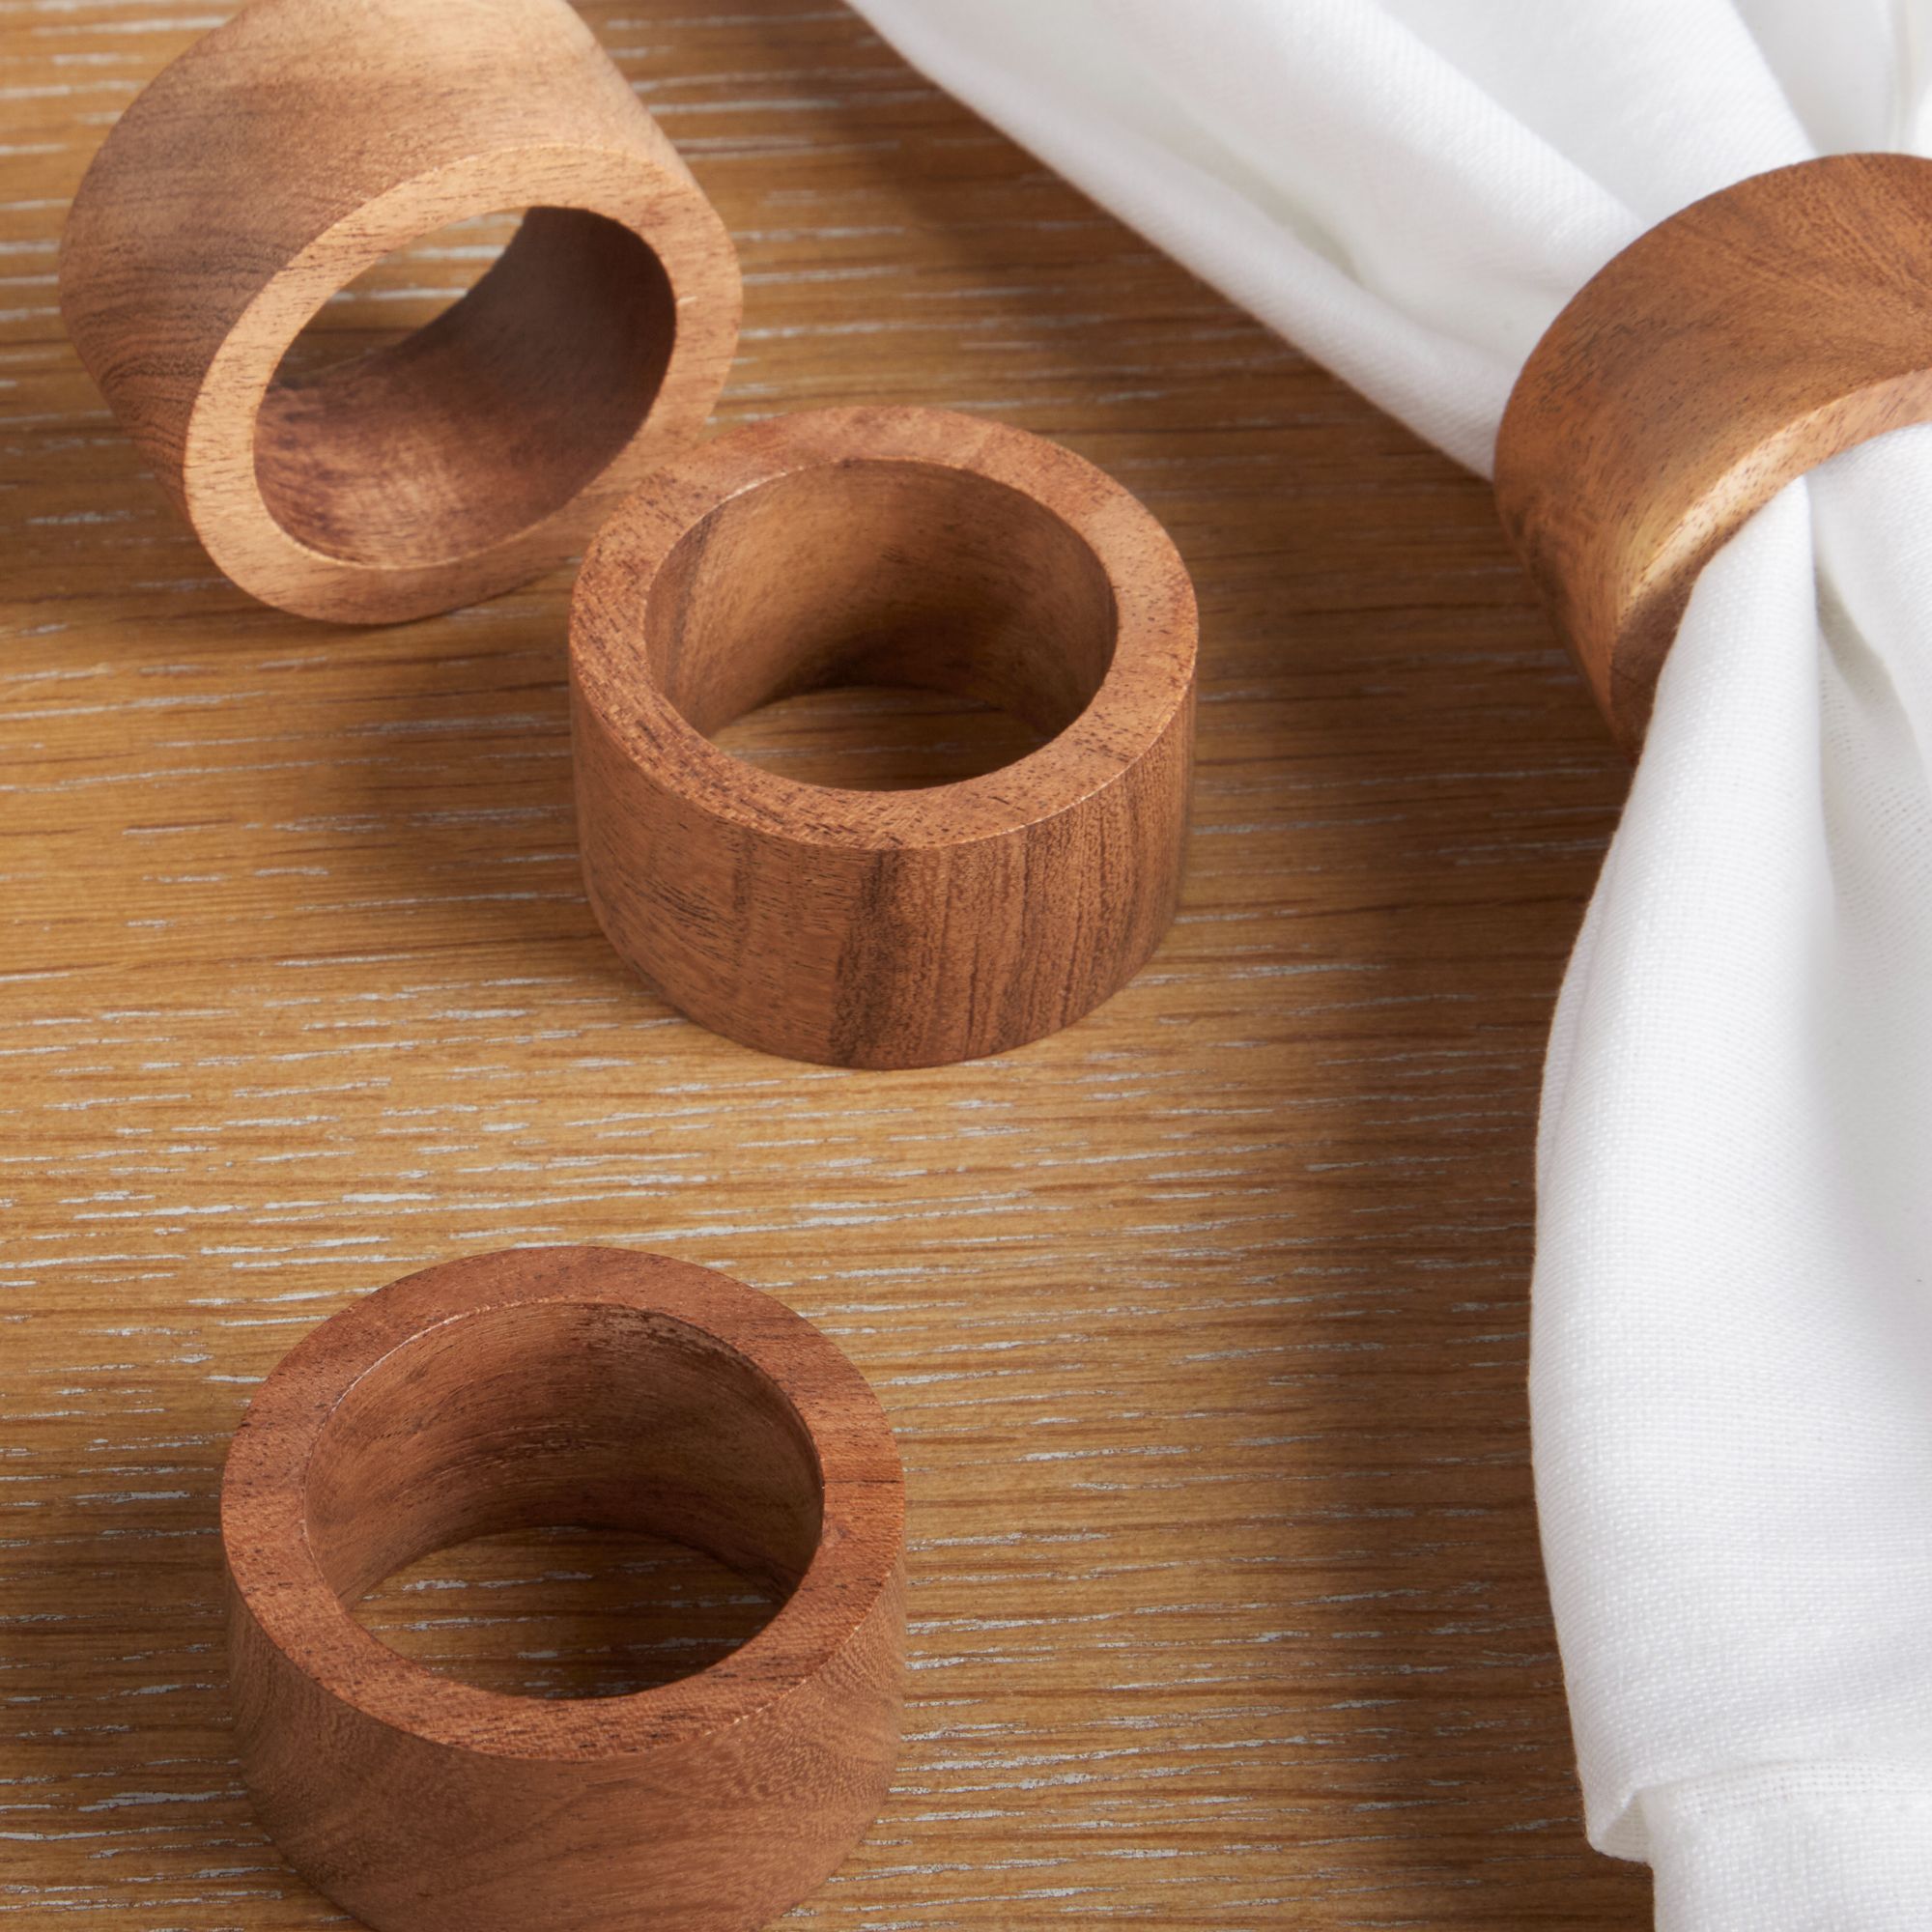 Better Homes & Gardens Napkin Rings - Brown - 4 Pieces